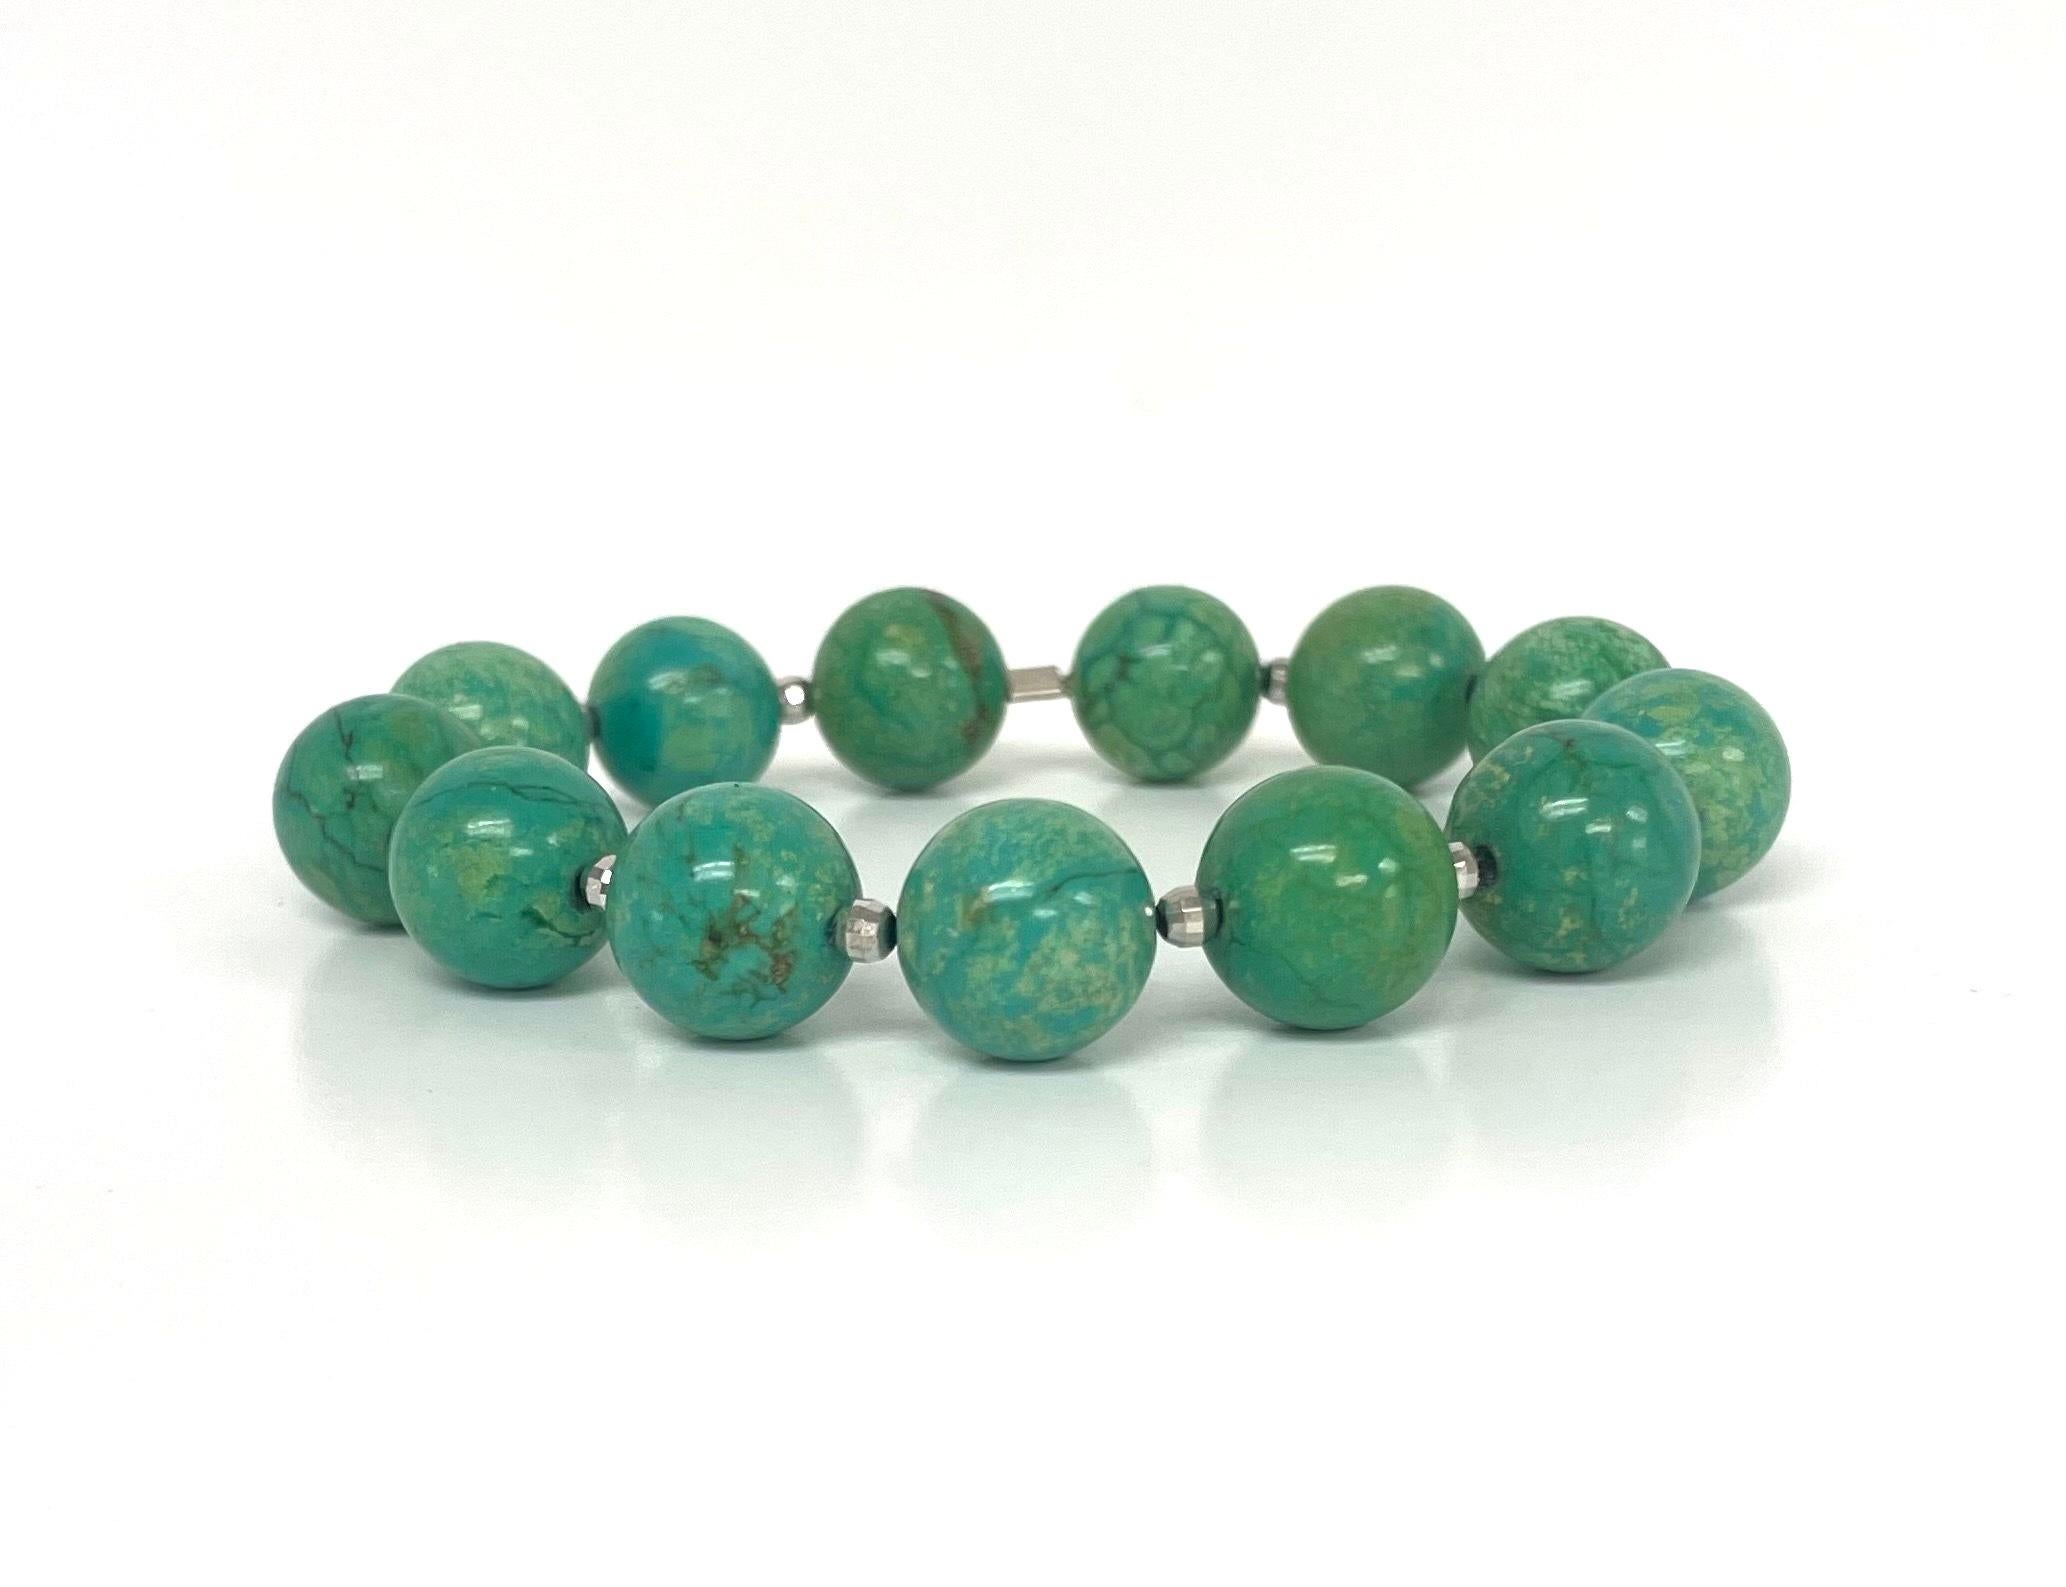 Description
Luscious green magnesite stretchy bracelet enhanced with 14k white gold faceted beads. Great for stacking.
Item # B1269 
Stack it with item# B1269. Sold separately.

Materials and Weight 
Green magnesite, 155cts, 13 pieces 12mm round